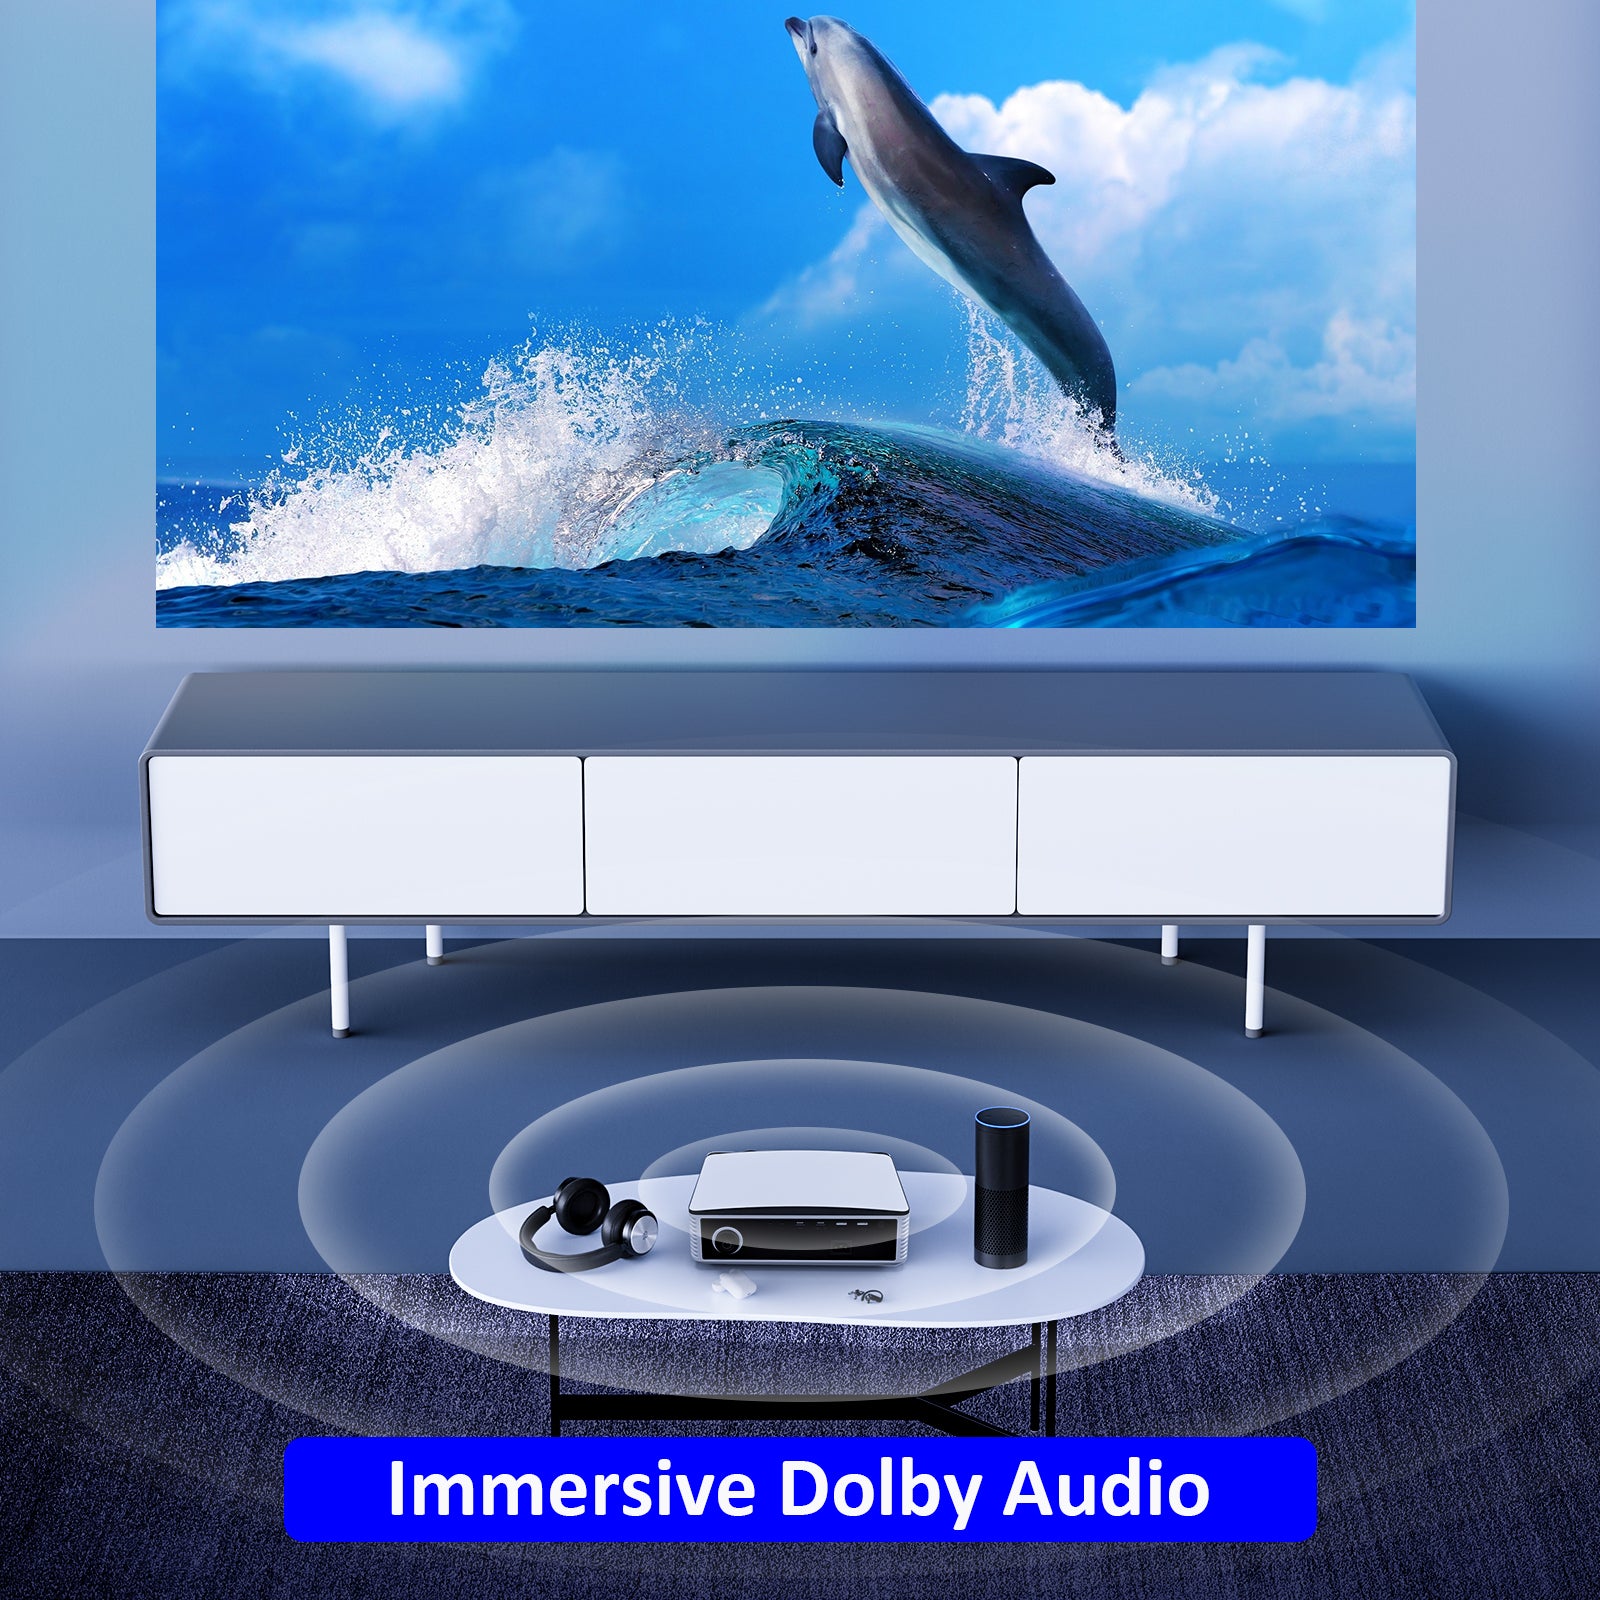 The projector supports Dolby Audio.